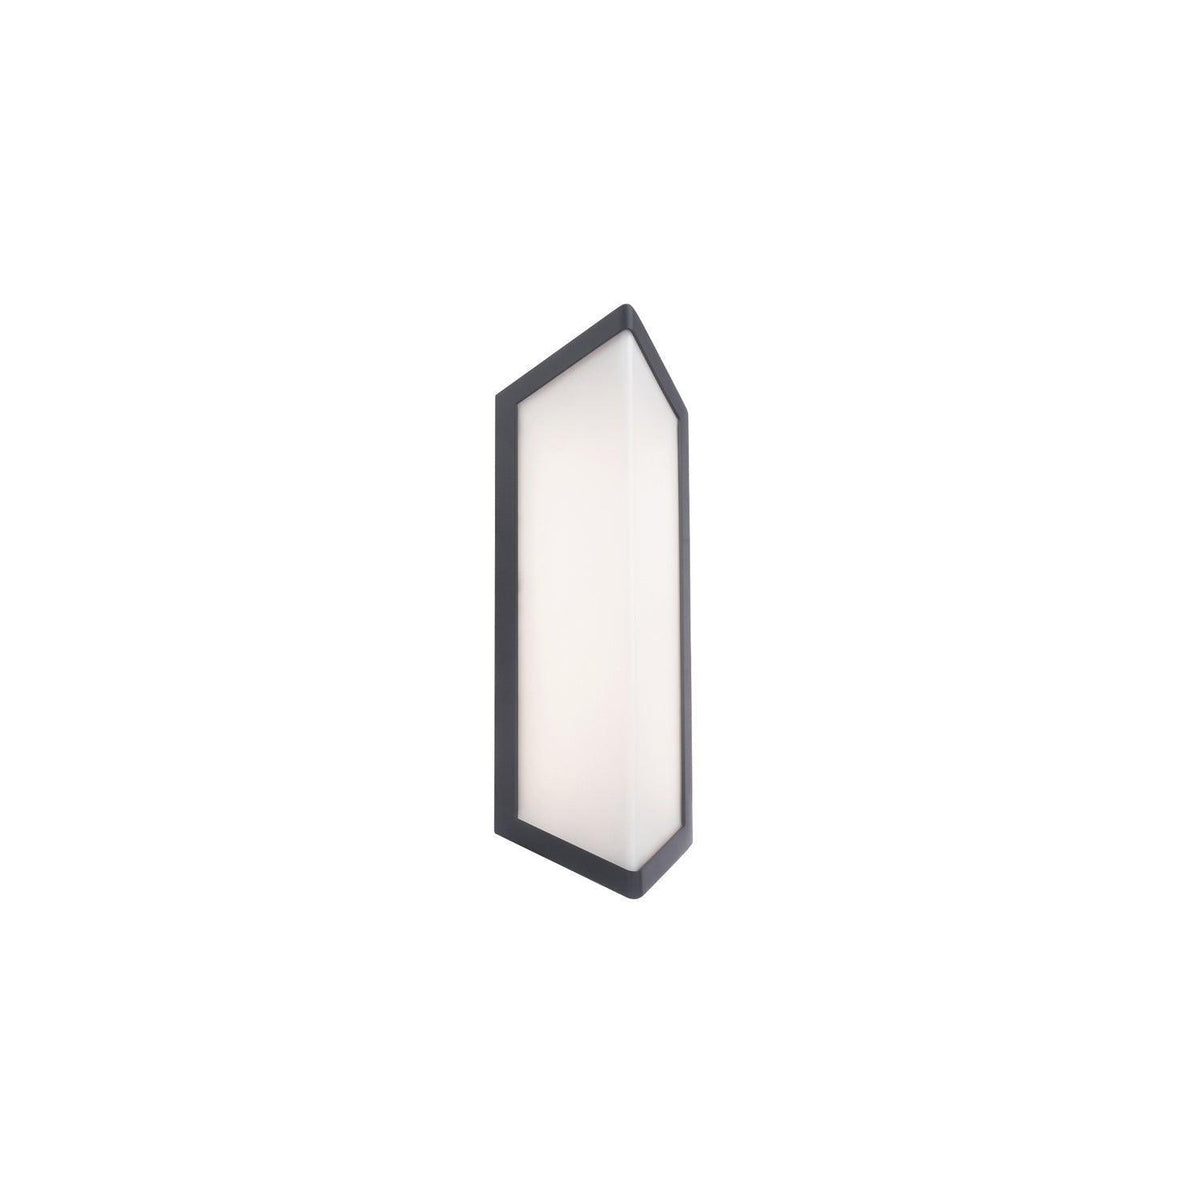 WAC Lighting - Corte LED Outdoor Wall Sconce - WS-W15216-30-BK | Montreal Lighting & Hardware